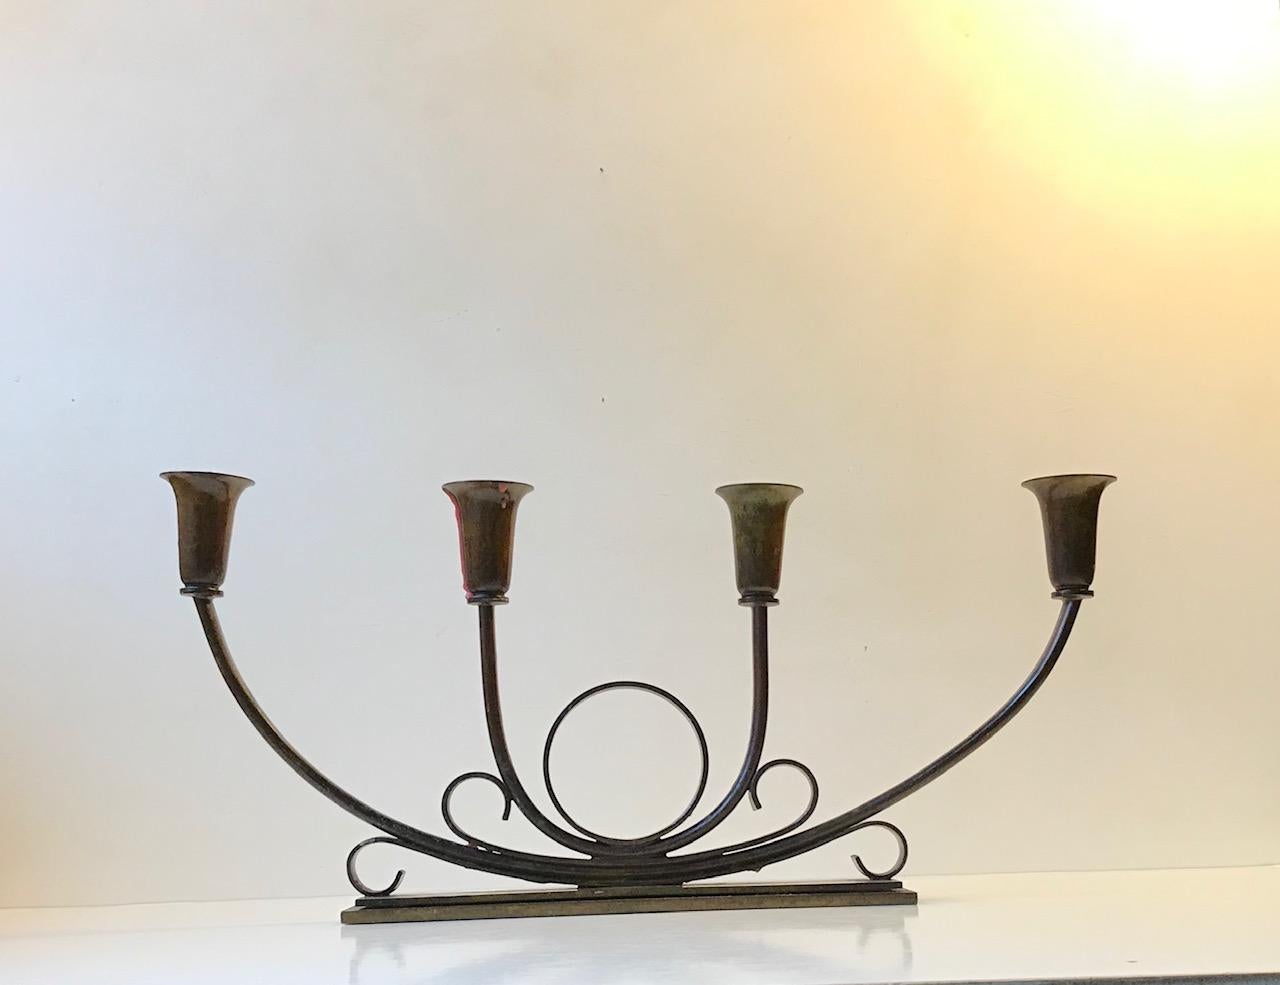 Superbly balanced and stylized bronze candelabra designed and manufactured by Ildfast in Denmark during the early 1930s. Architecturally 'staired' base measuring 23 x 5 cm. Is to fitted with 4 regular sized candles.